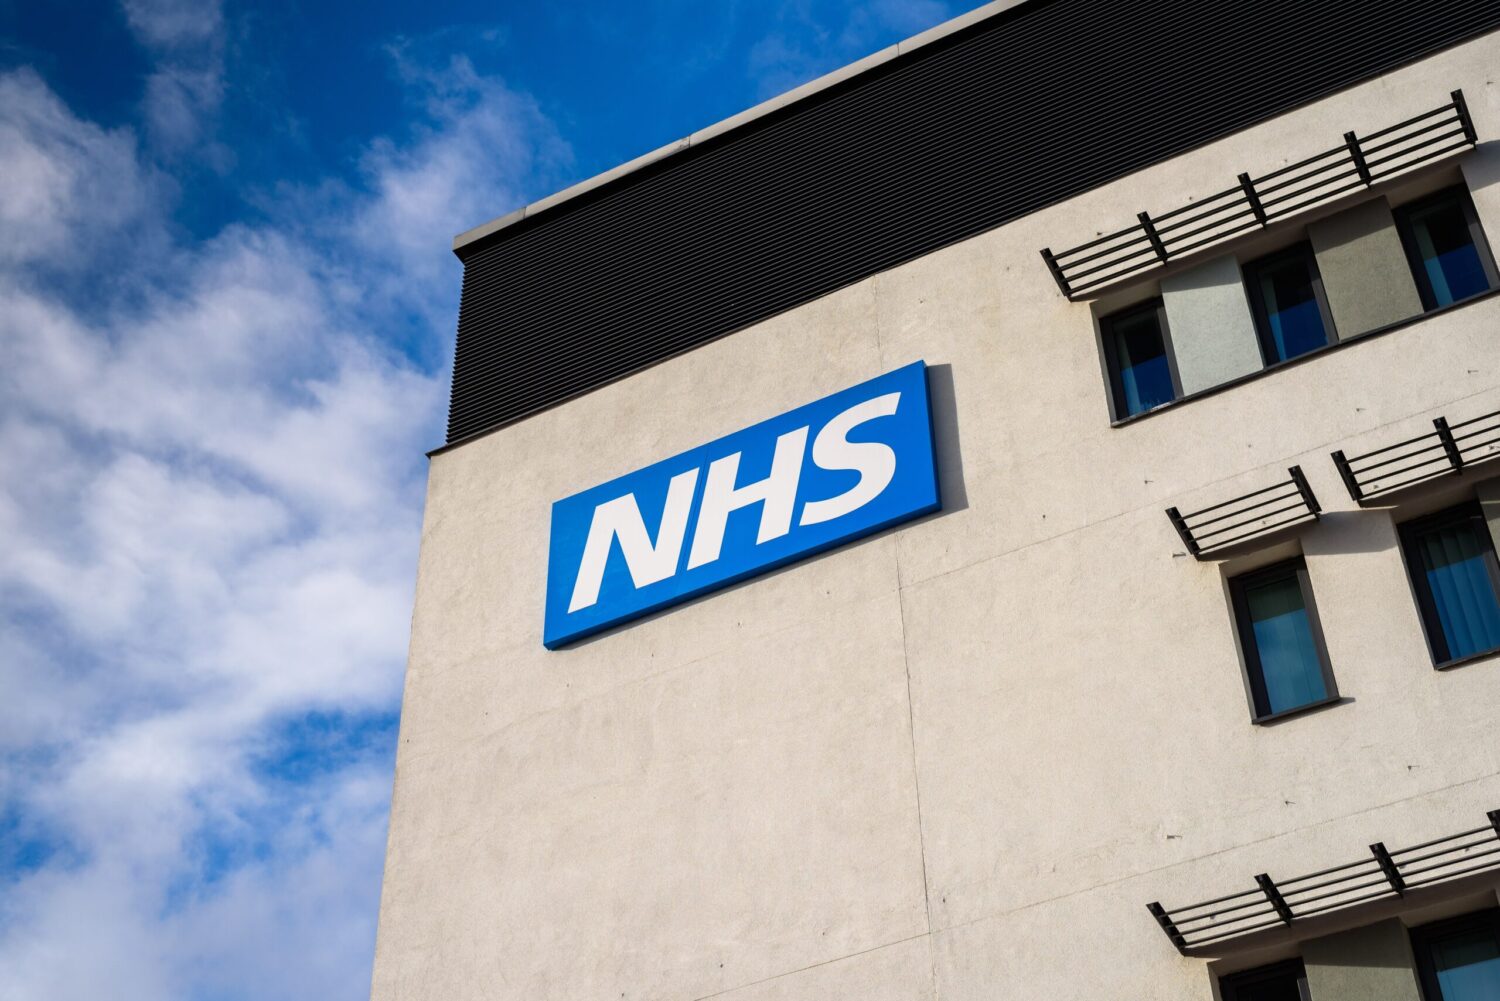 SETsquared innovators lead the way towards a more sustainable NHS